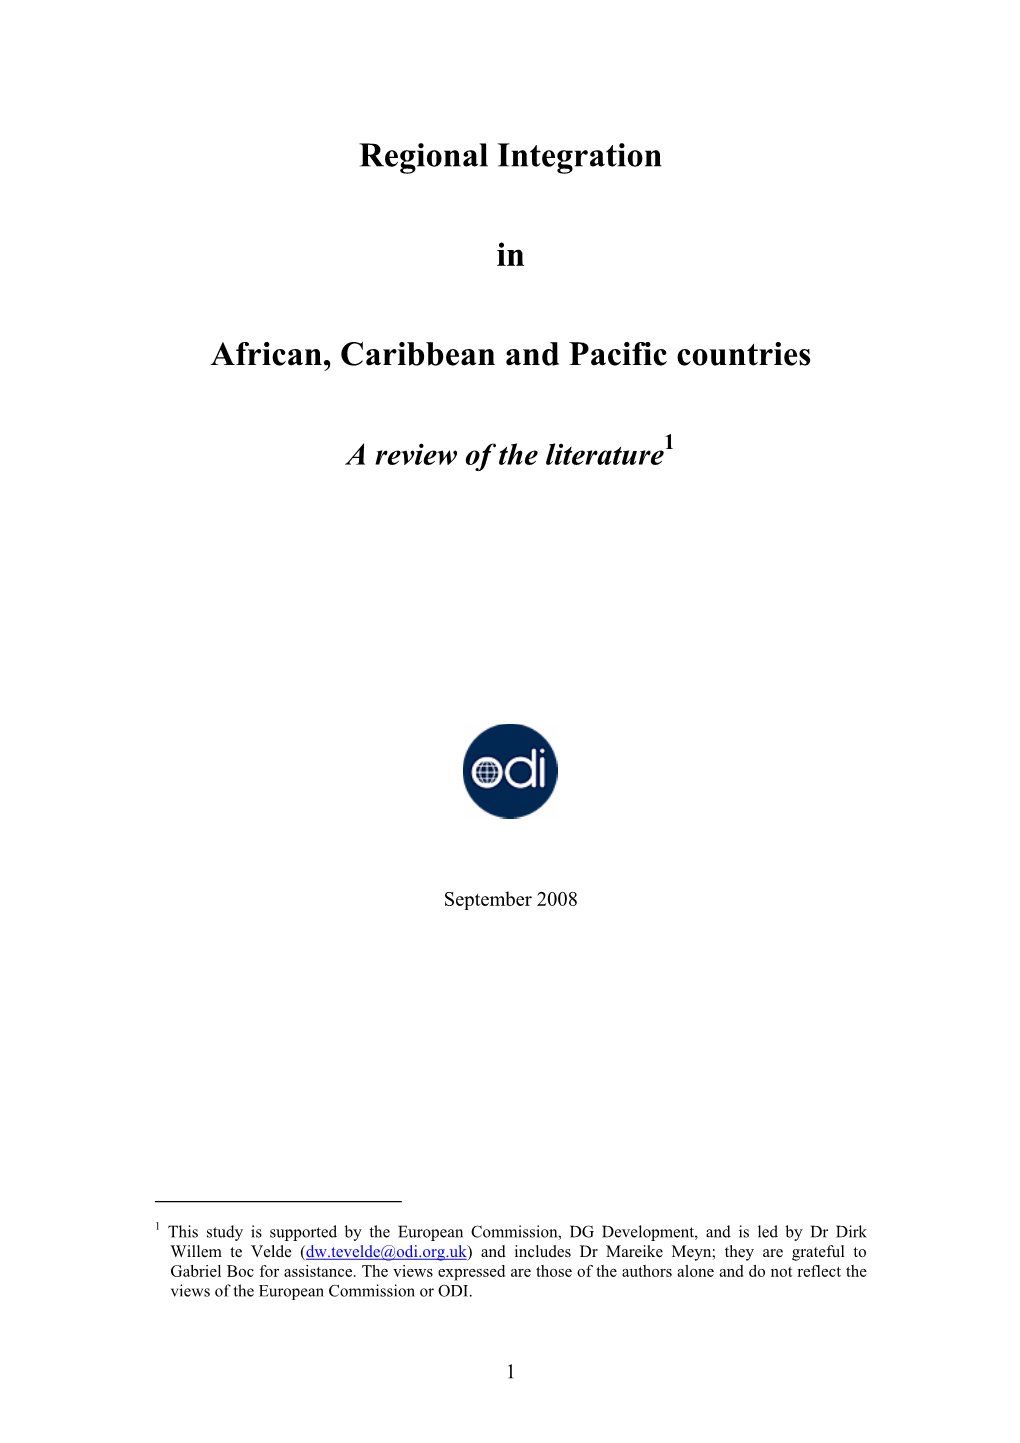 Regional Intergration in African, Caribbean and Pacific Countries